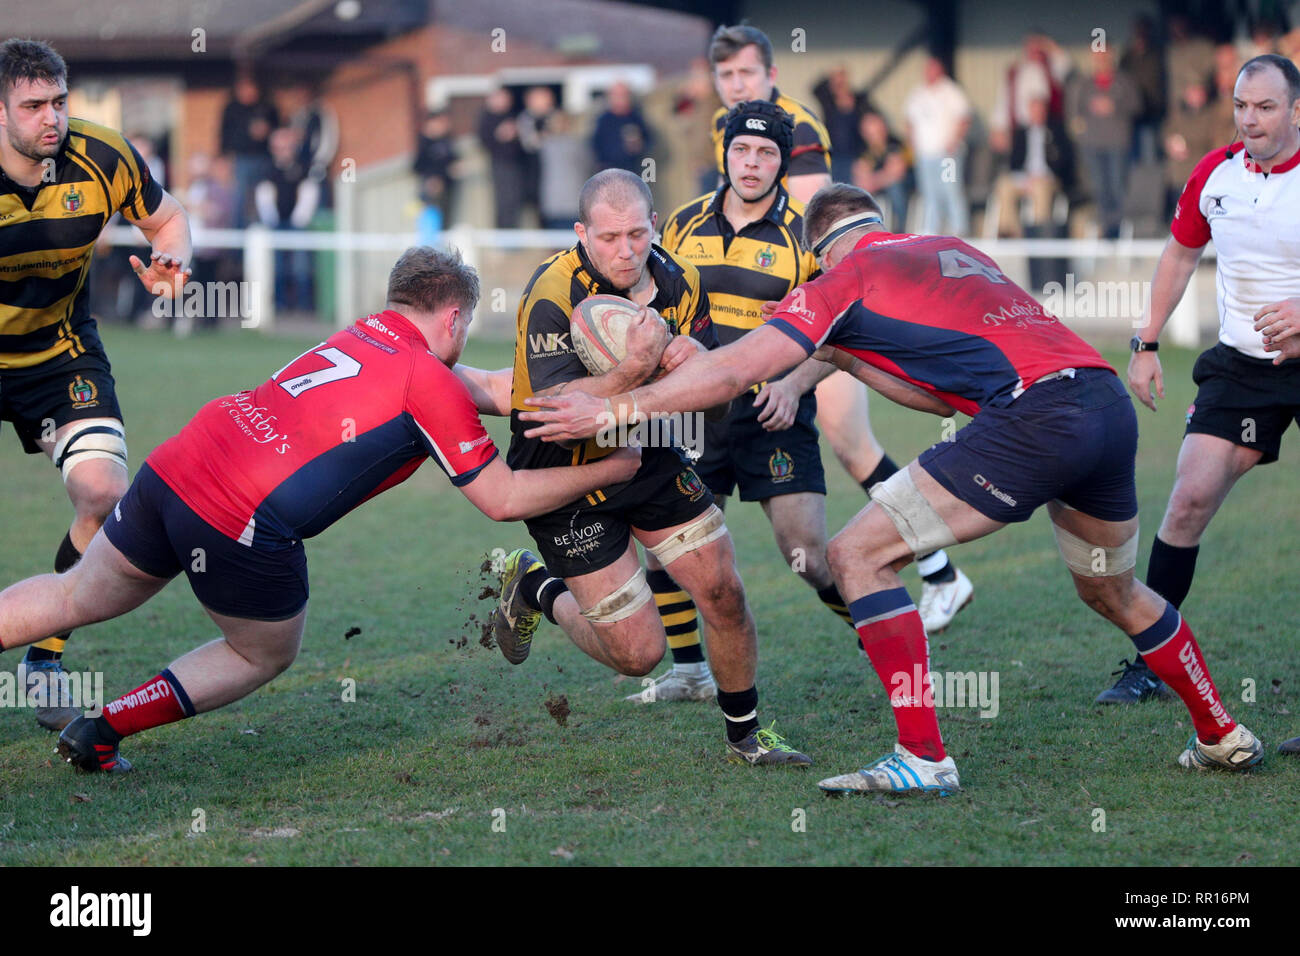 23.02.2019 Hinckley, Leicester, England. Rugby Union, Hinckley rfc v Chester rfc.   Henry Povoas on the charge for Hinckley during the RFU National Le Stock Photo